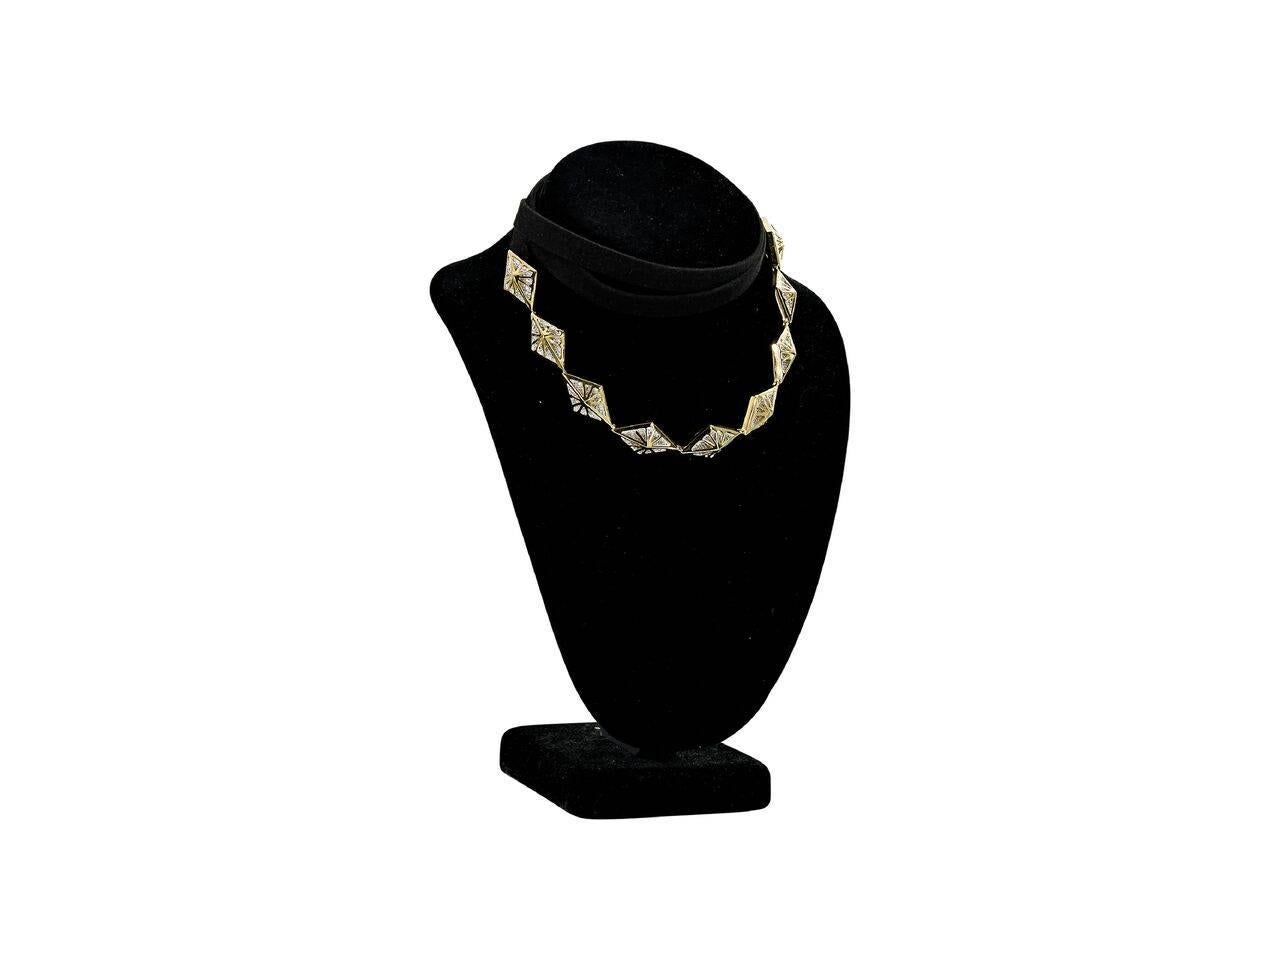 Product details:  Crystal charm choker necklace by Noir Jewelry.  Adjustable tie closure.  Goldtone hardware.  69